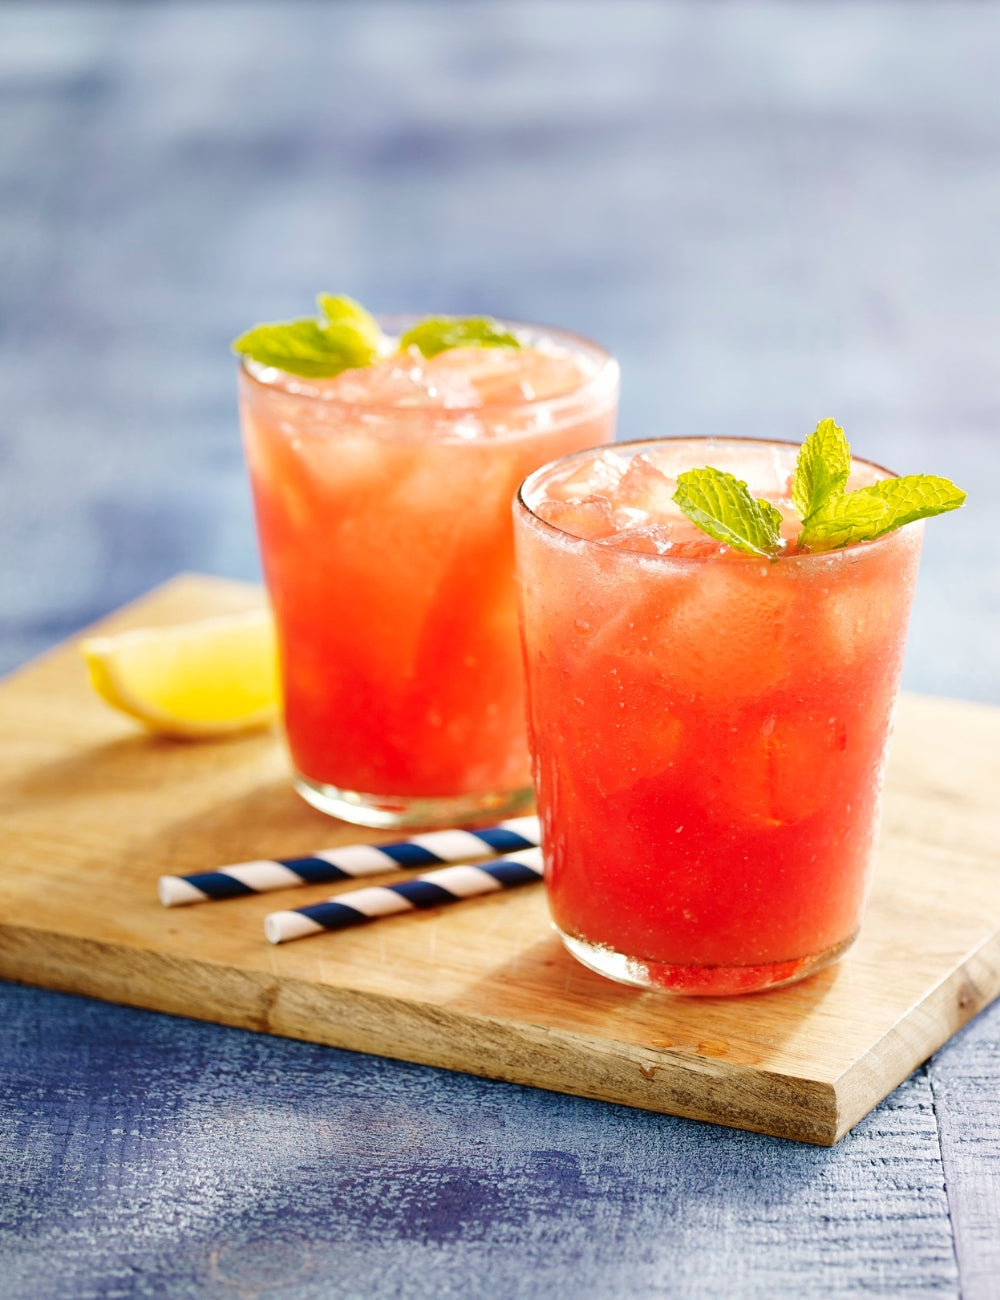 Celebrate National Lemonade Day with Thermomix®